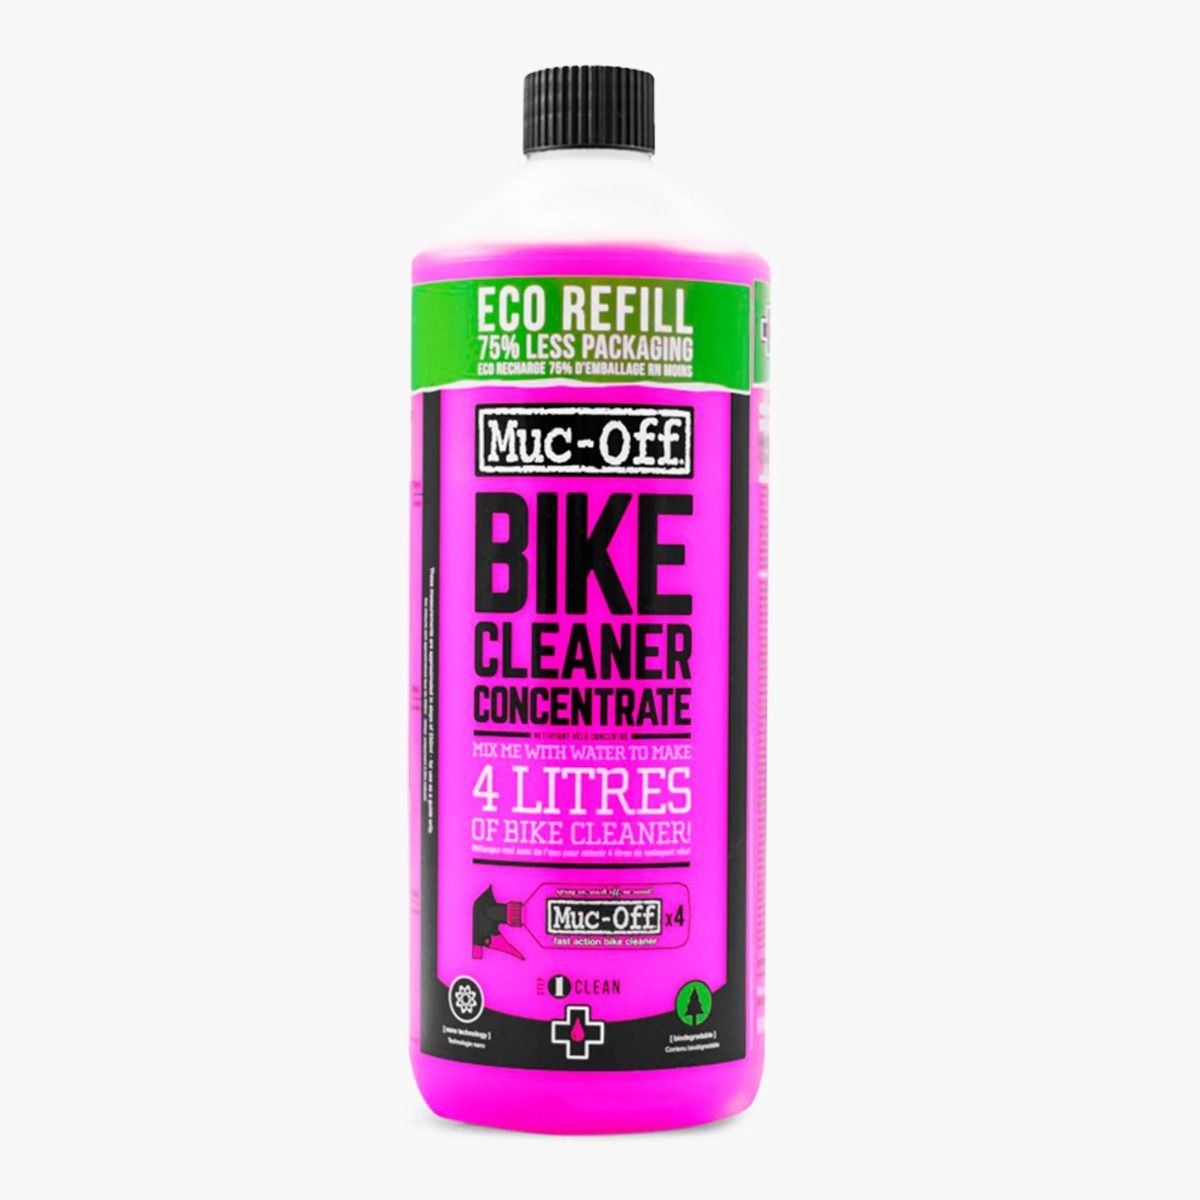 Bike cleaner concentrate 4 l  FROM MUC-OFF